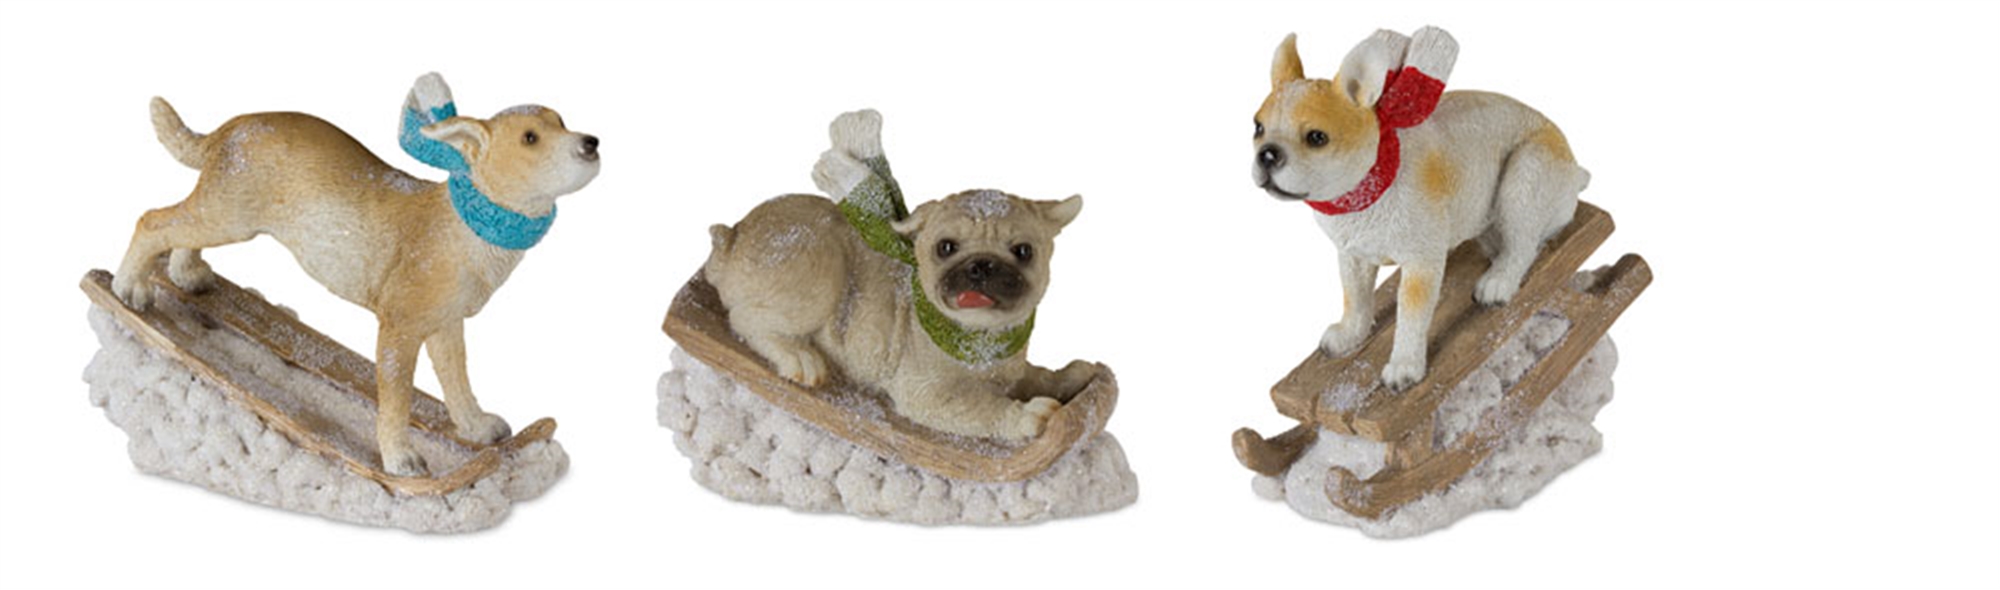 Winter Dogs (Set of 3) 4.75"H, 5.5"H, 6"H Resin